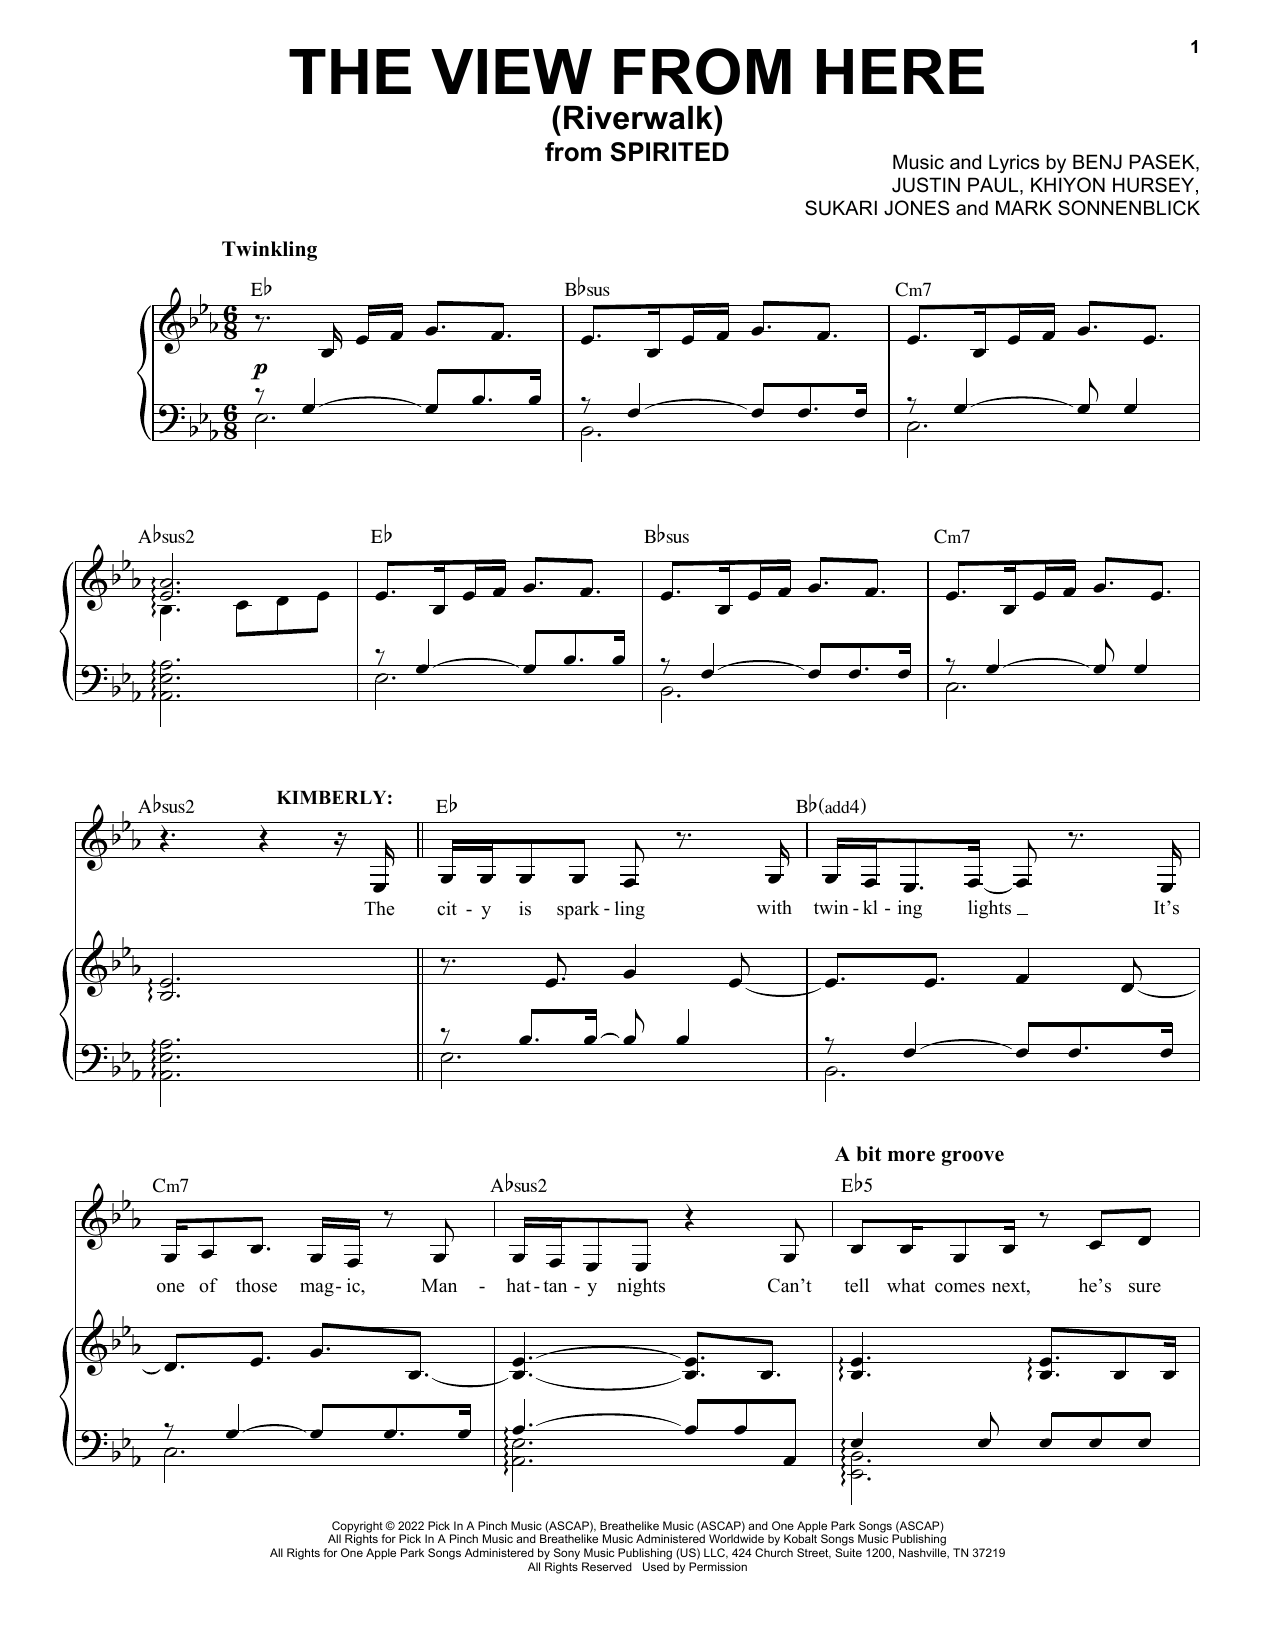 Download Pasek & Paul The View From Here (Riverwalk) (from Sp Sheet Music